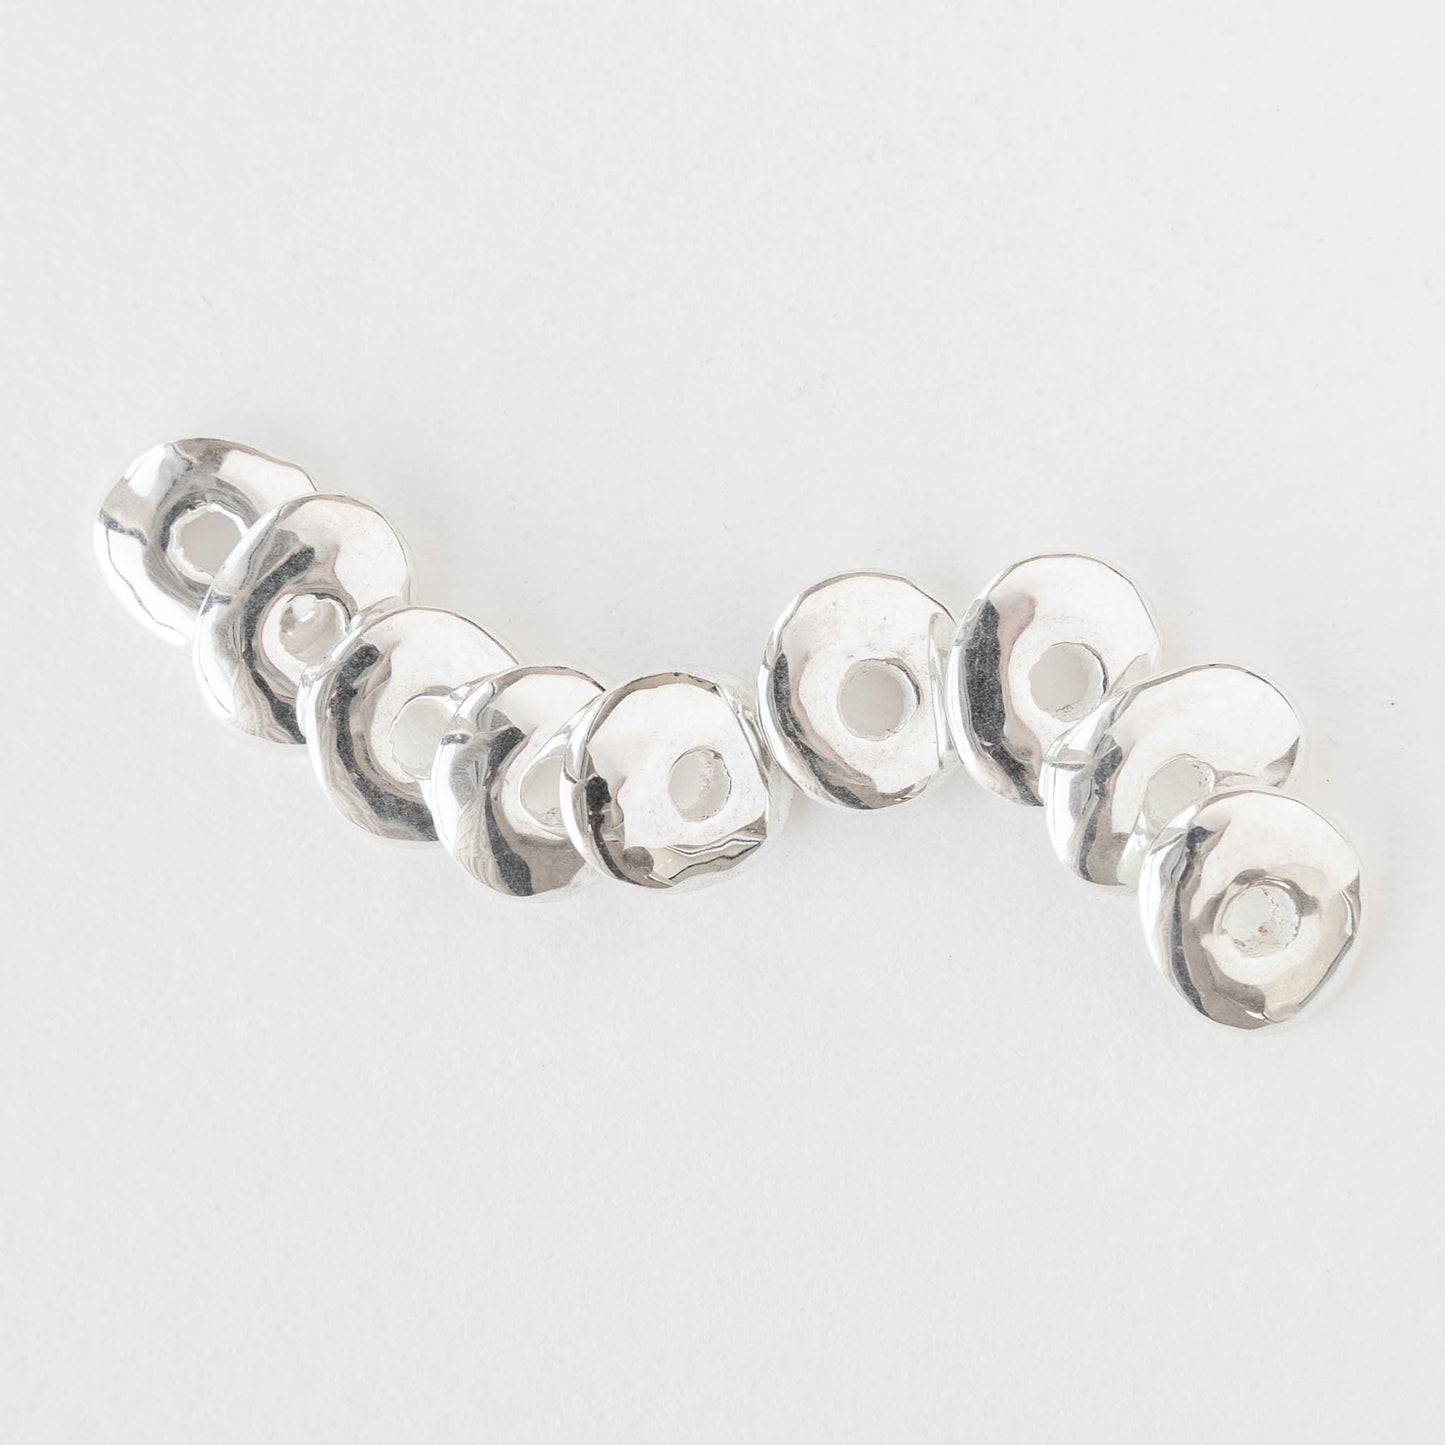 10x12mm Silver Coated Ceramic Beads - 10 or 30